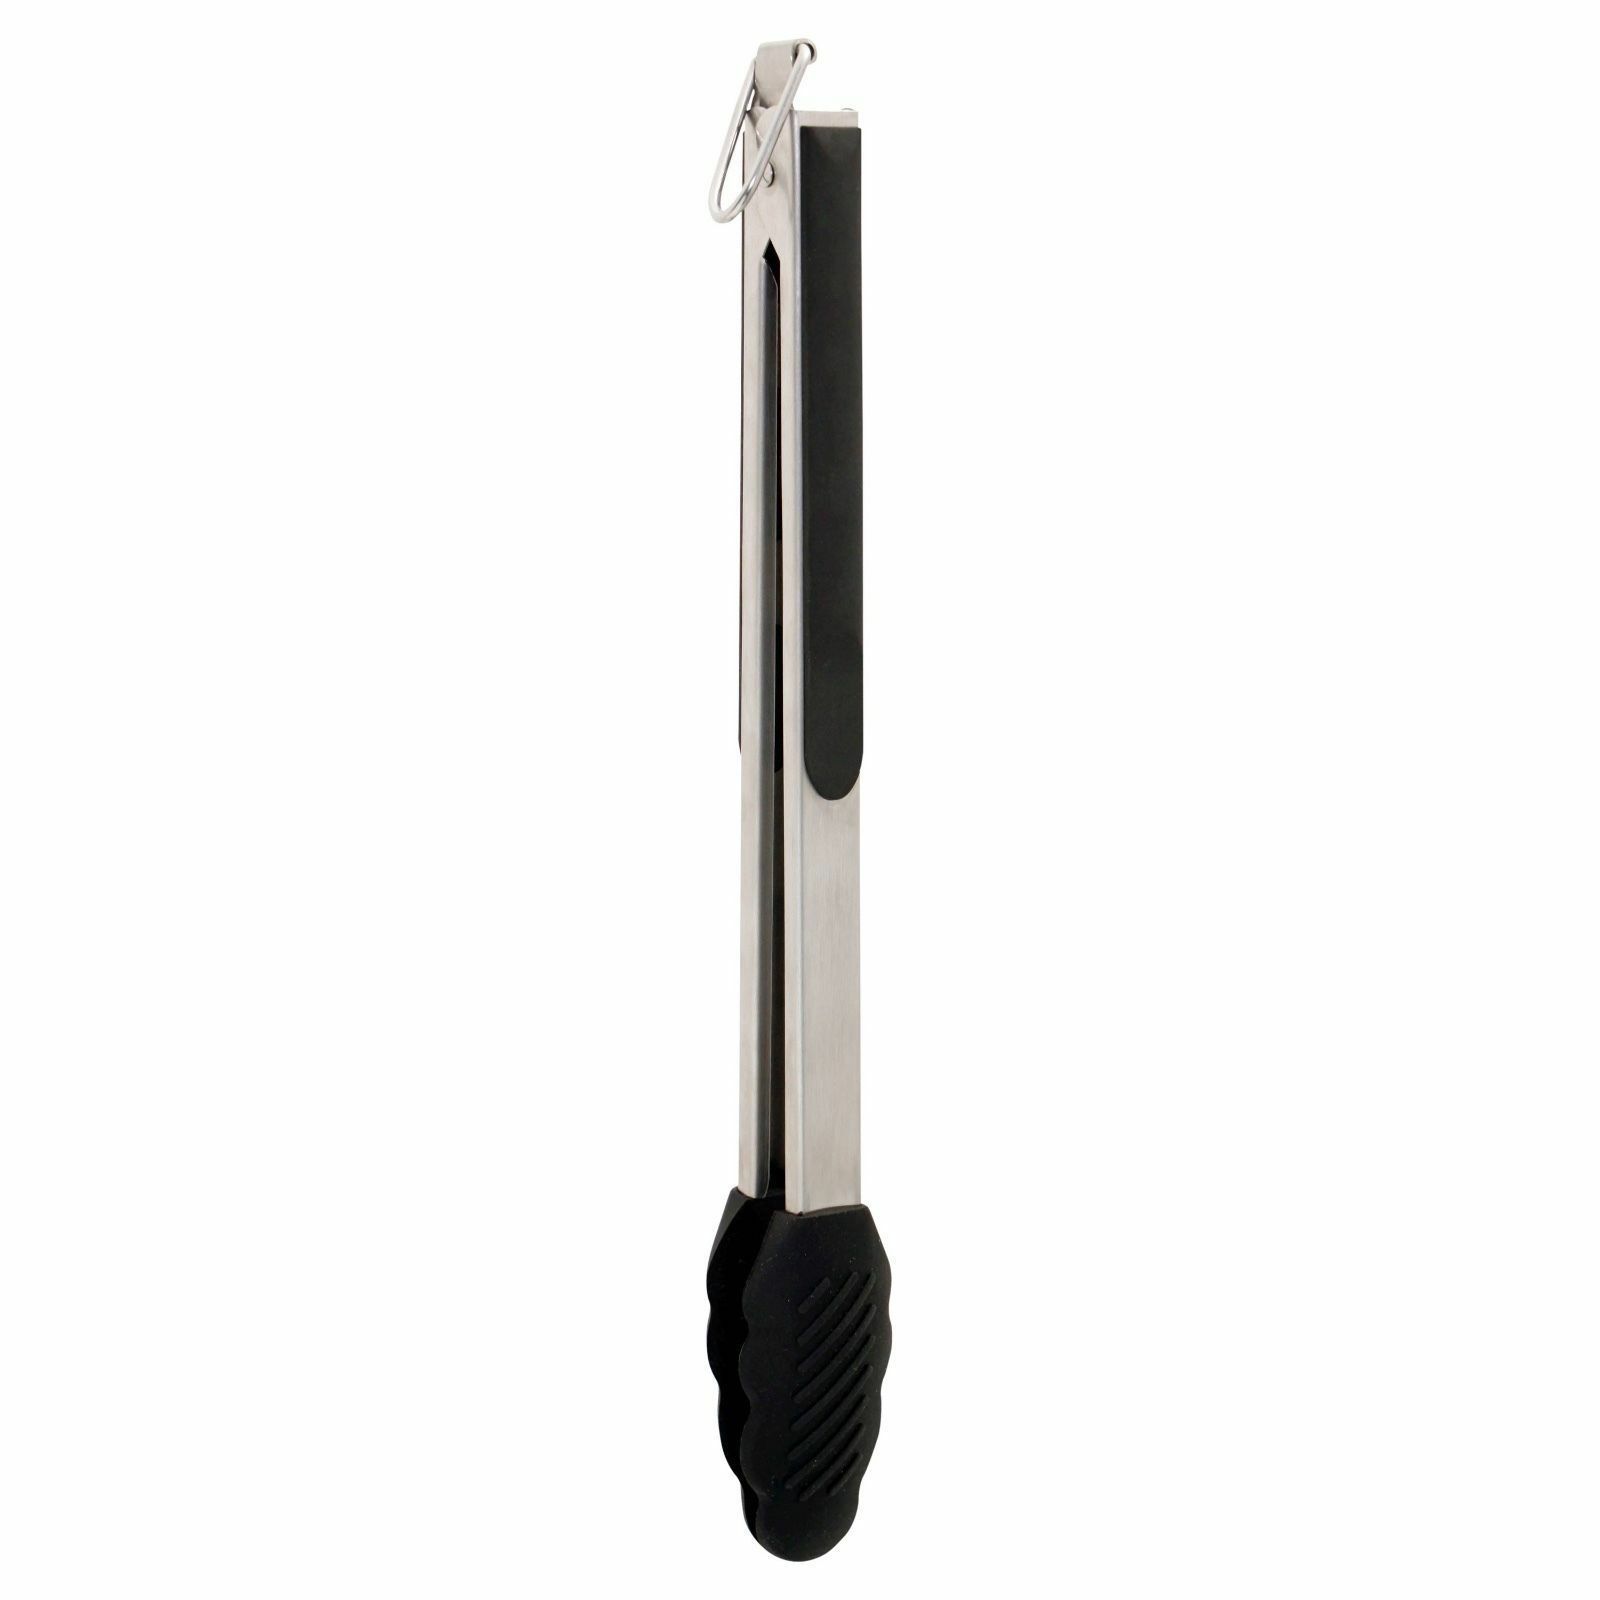 New 13" Stainless Steel Locking Tongs Black Silicone Tips Room Essentials CHEAP - £4.67 GBP - £7.80 GBP